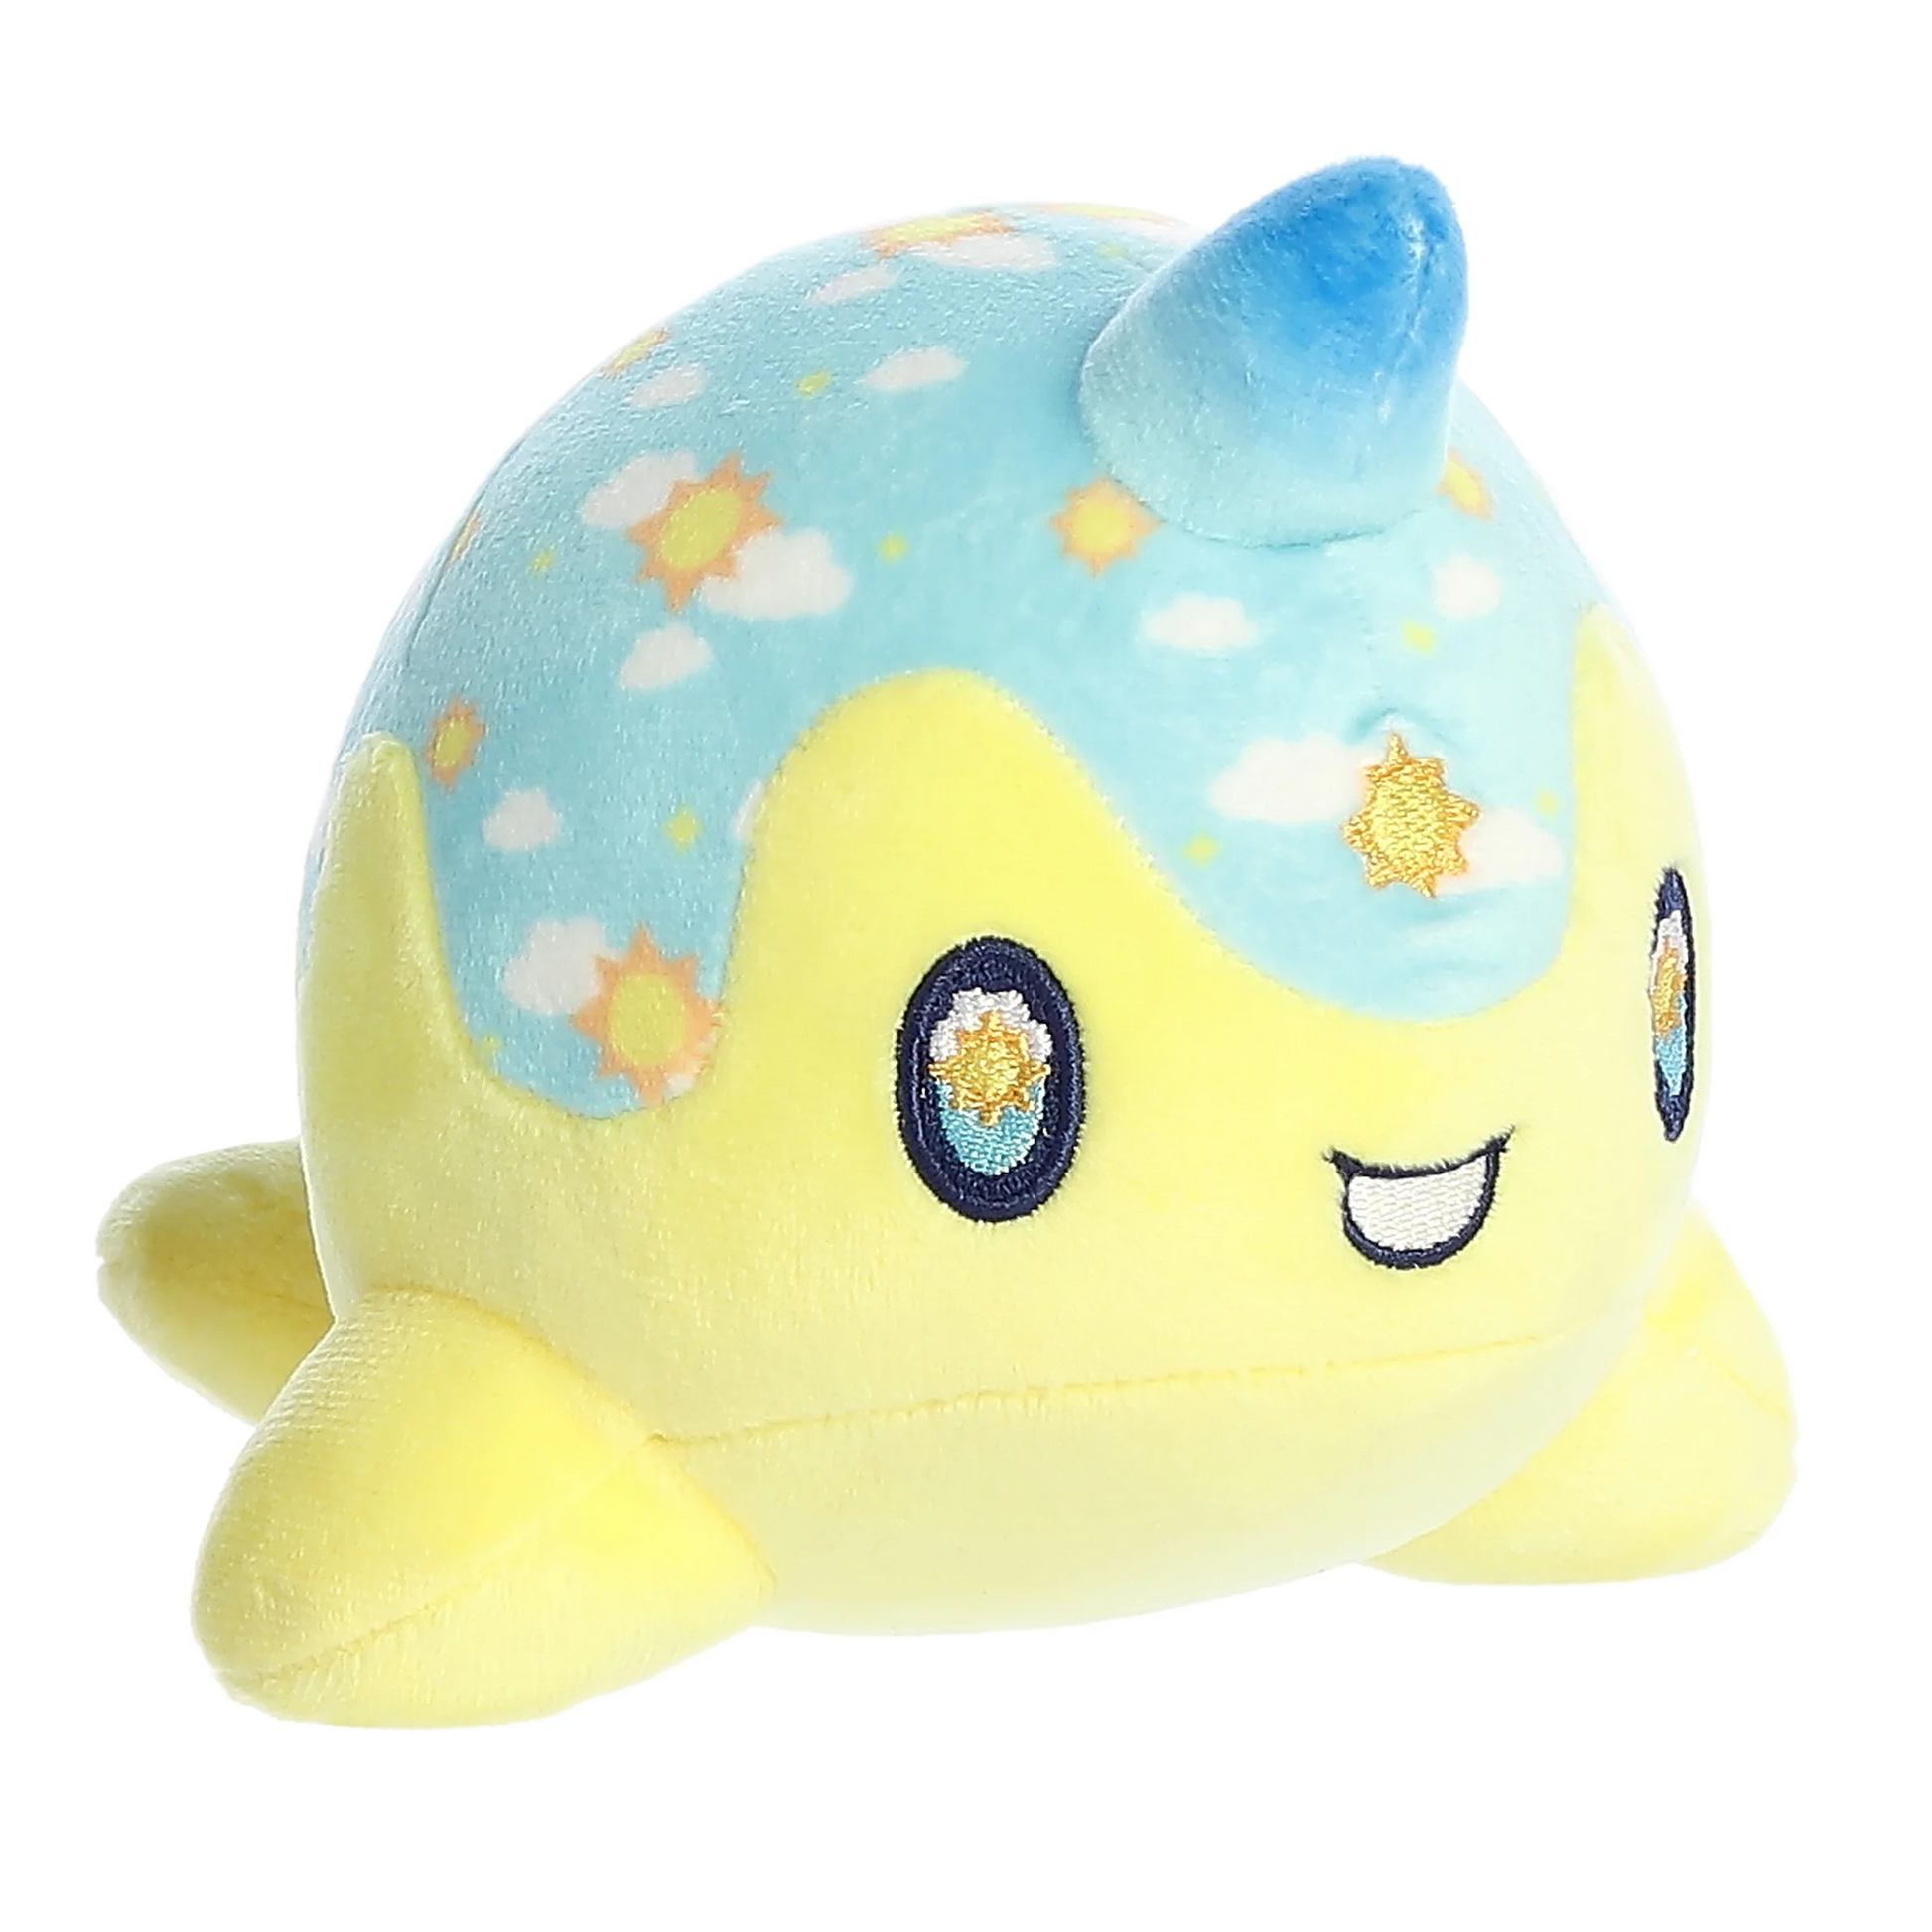 Sunny Day Nomwhal Plush 7" Tasty Peach